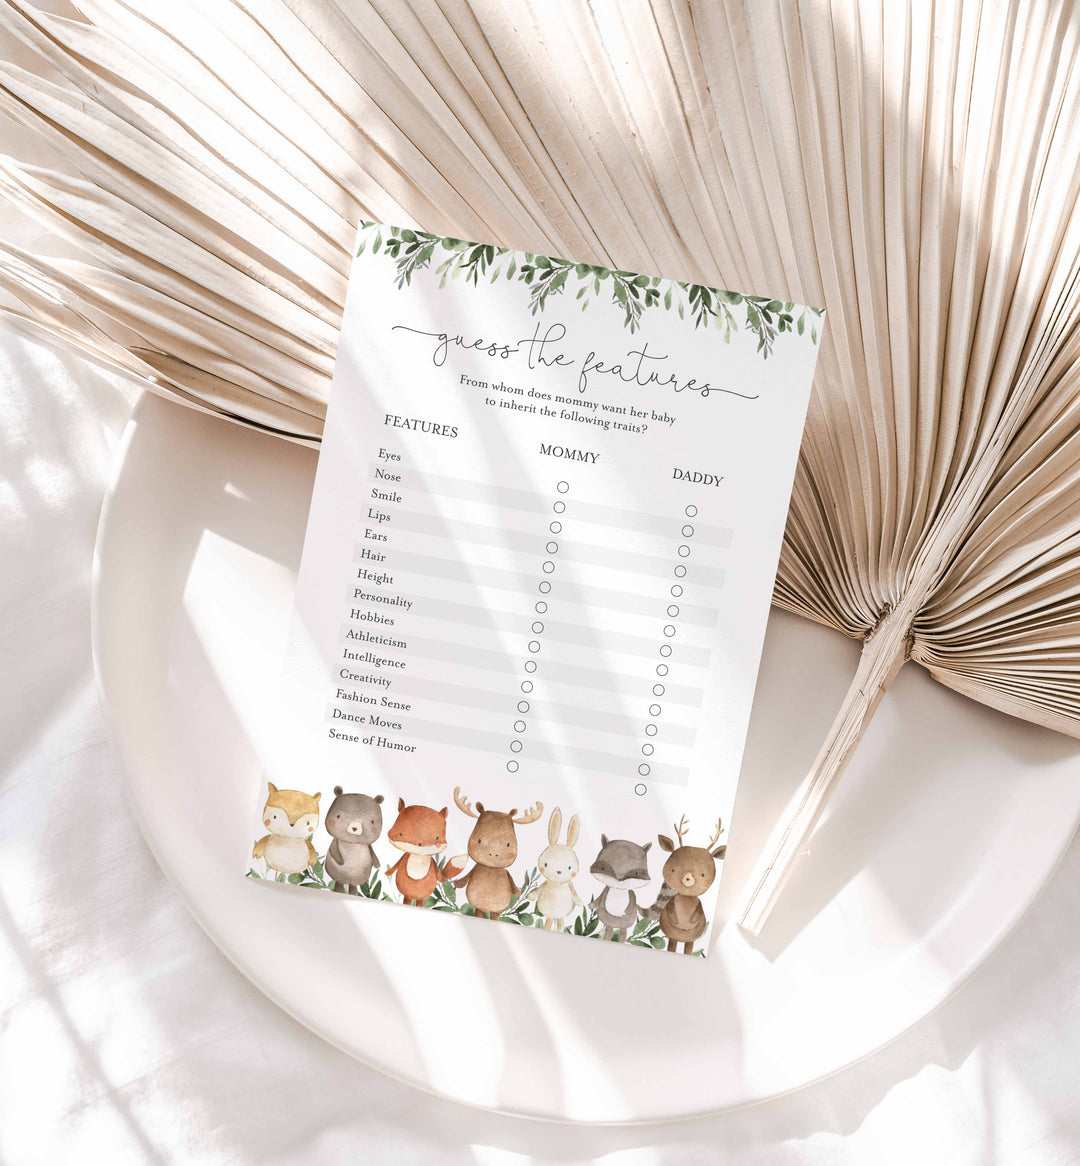 Woodland Friends Baby Shower Guess The Features Game Printable